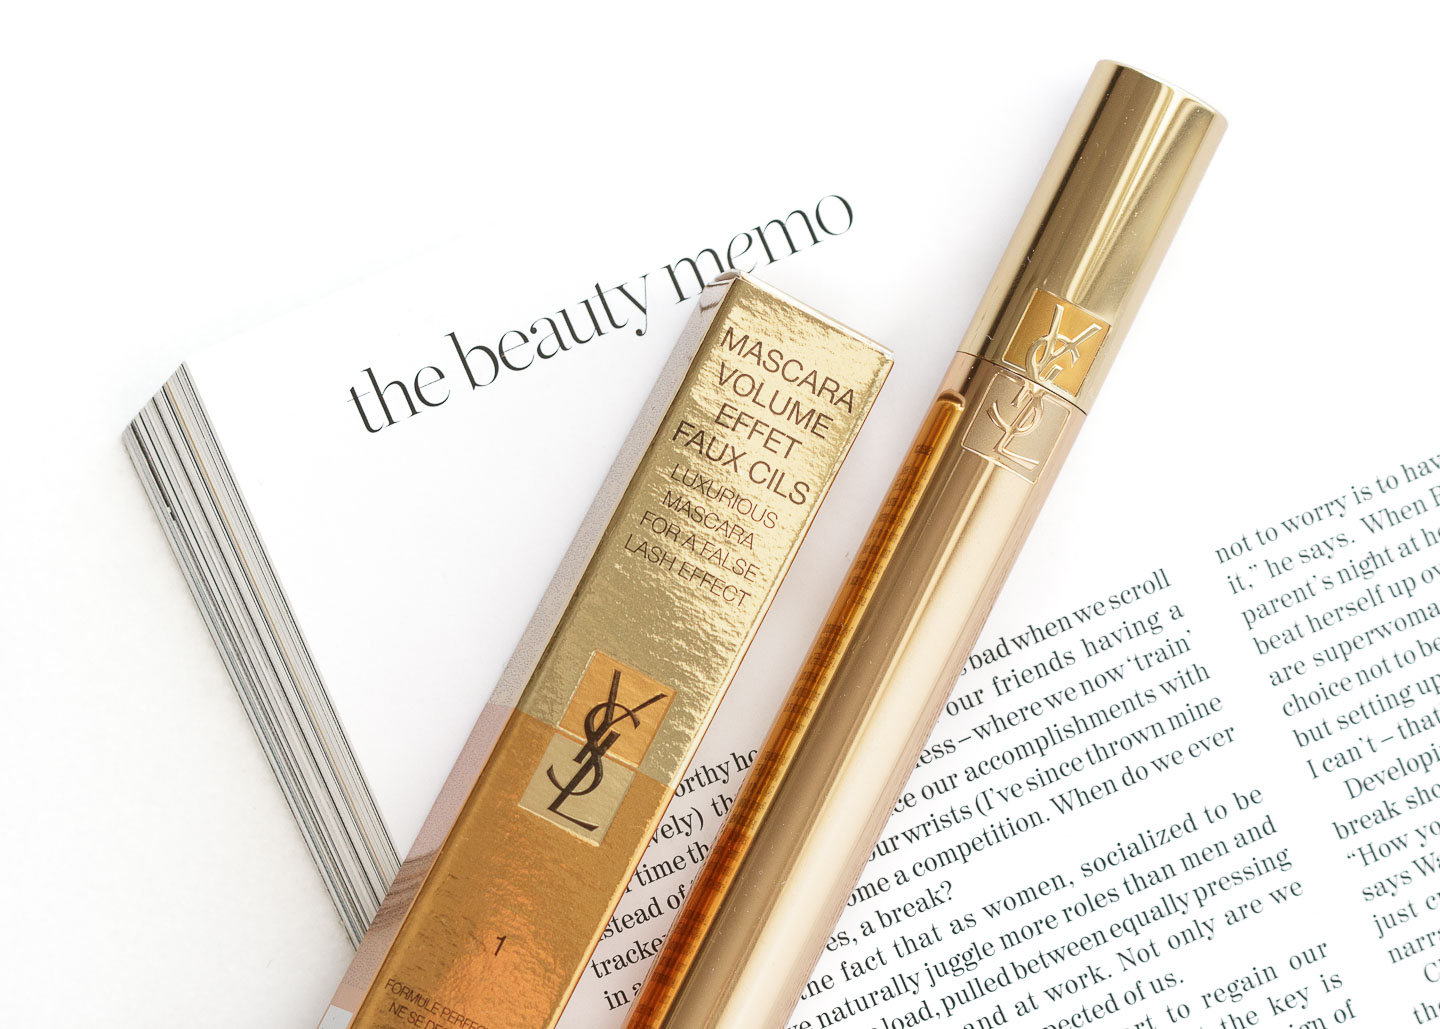 YSL Mascara Volume Effet Faux Cils Review - The Glamorous Gleam %